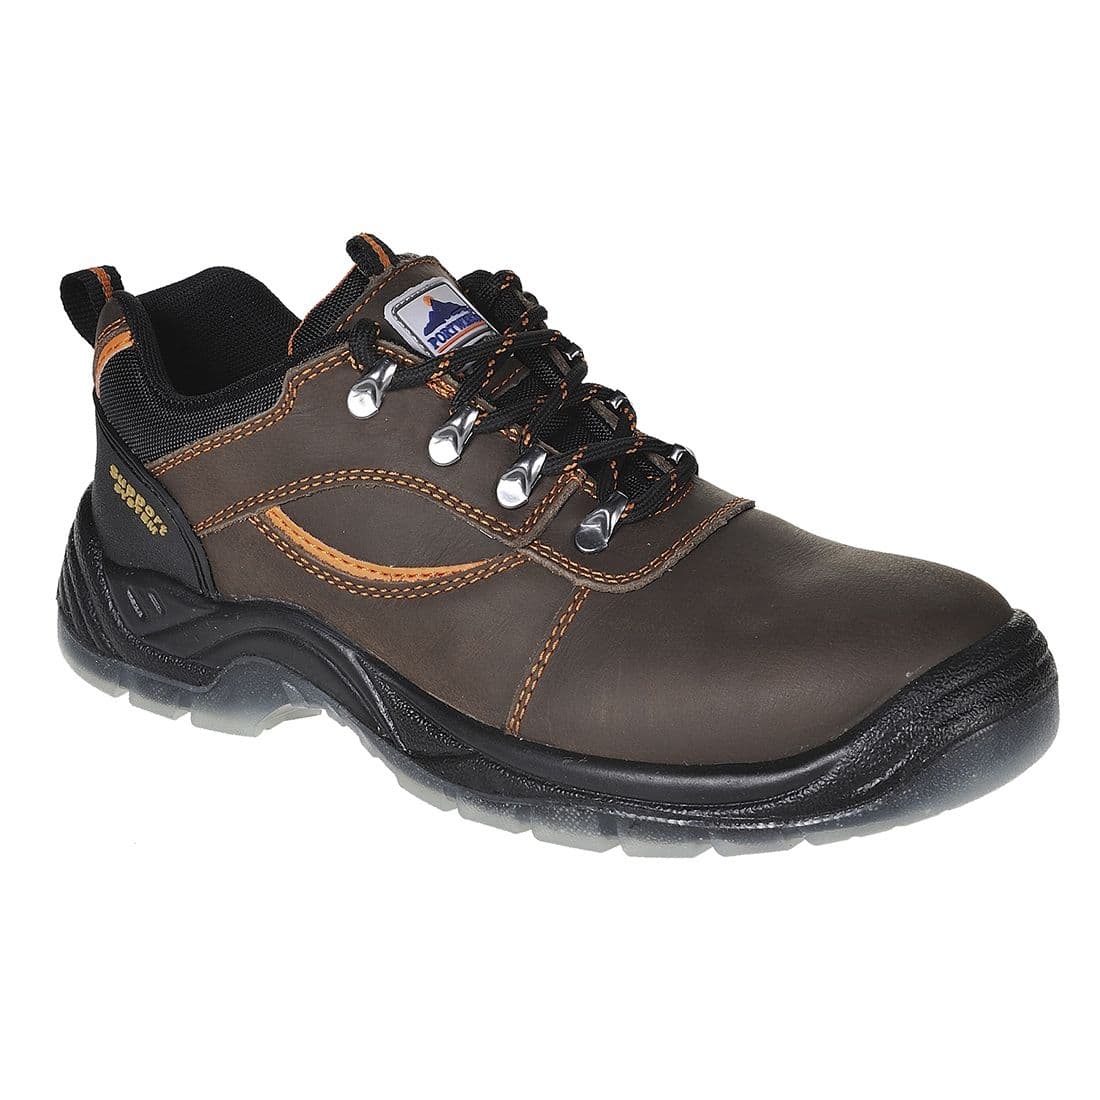 Portwest Steelite Mustang Shoe S3 – Brown – 44 – Slip/Water Resistant – PPE – Taft Safety Store